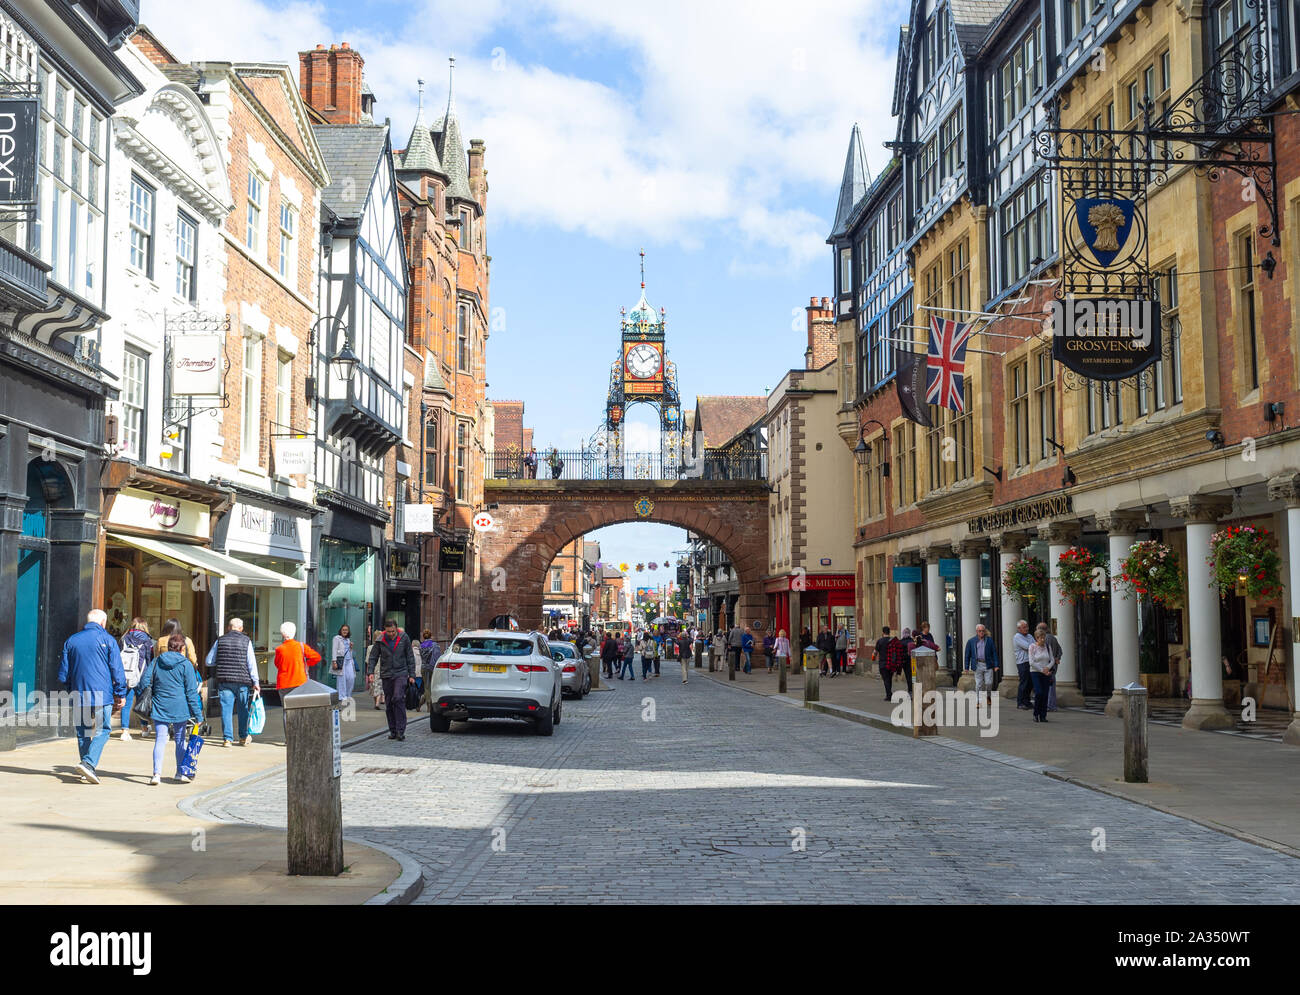 Eastgate pedestrianised shopping area, Chester. Eastgate clock in the background. Stock Photo